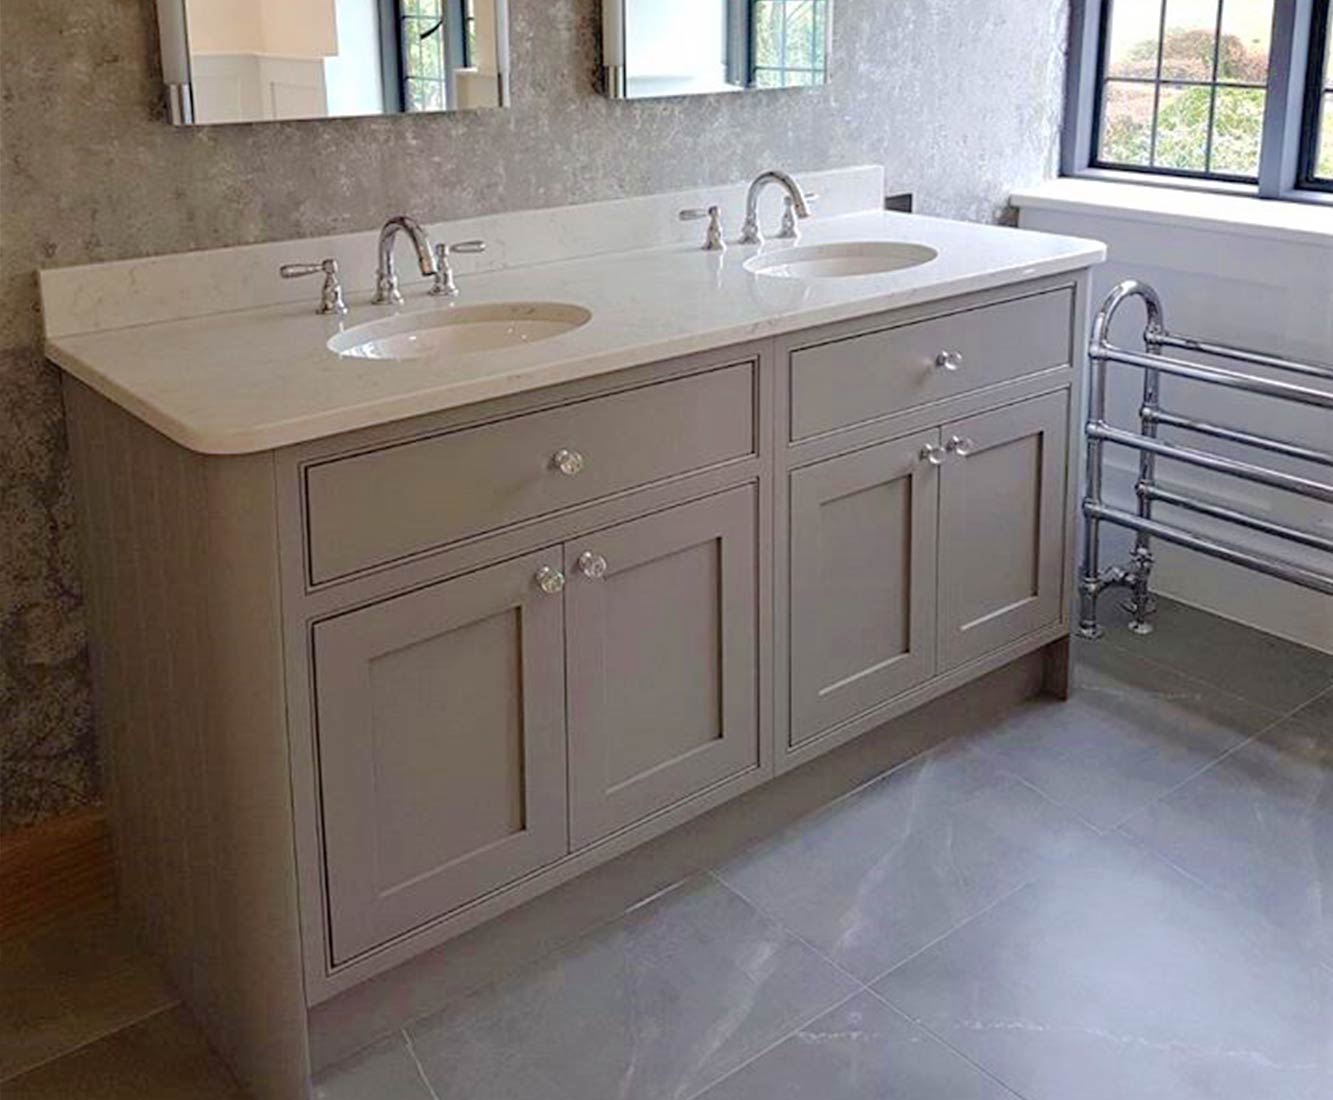 Cooper Bespoke Joinery Bespoke vanity double sink worsted painted jim lawrence